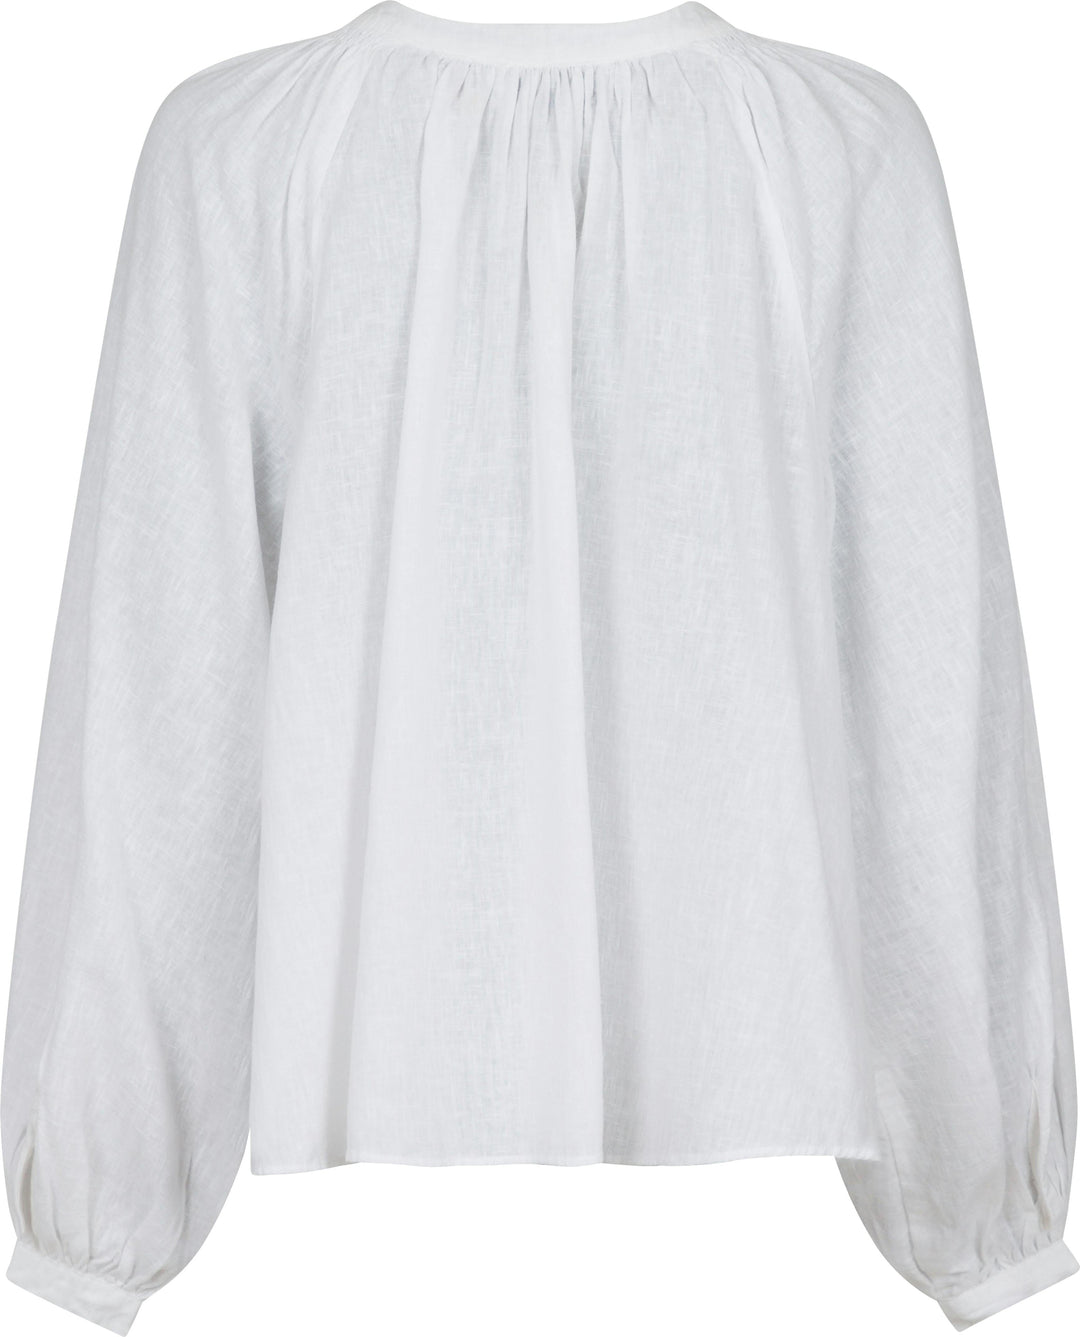 Neo Noir - Kirsty Solid Blouse - White